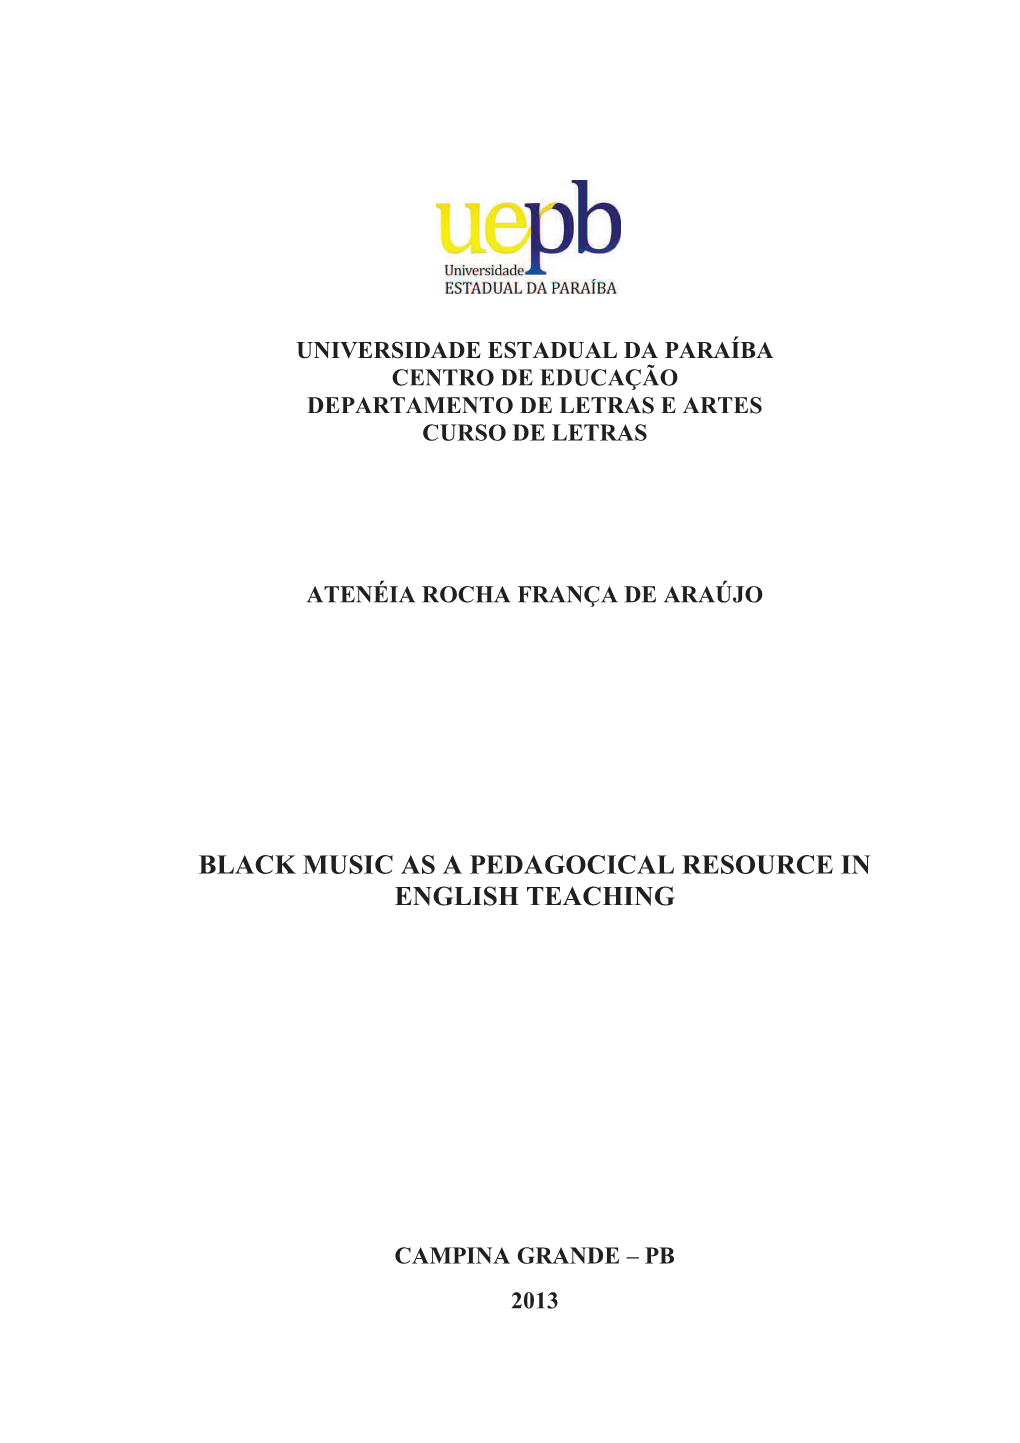 Black Music As a Pedagocical Resource in English Teaching